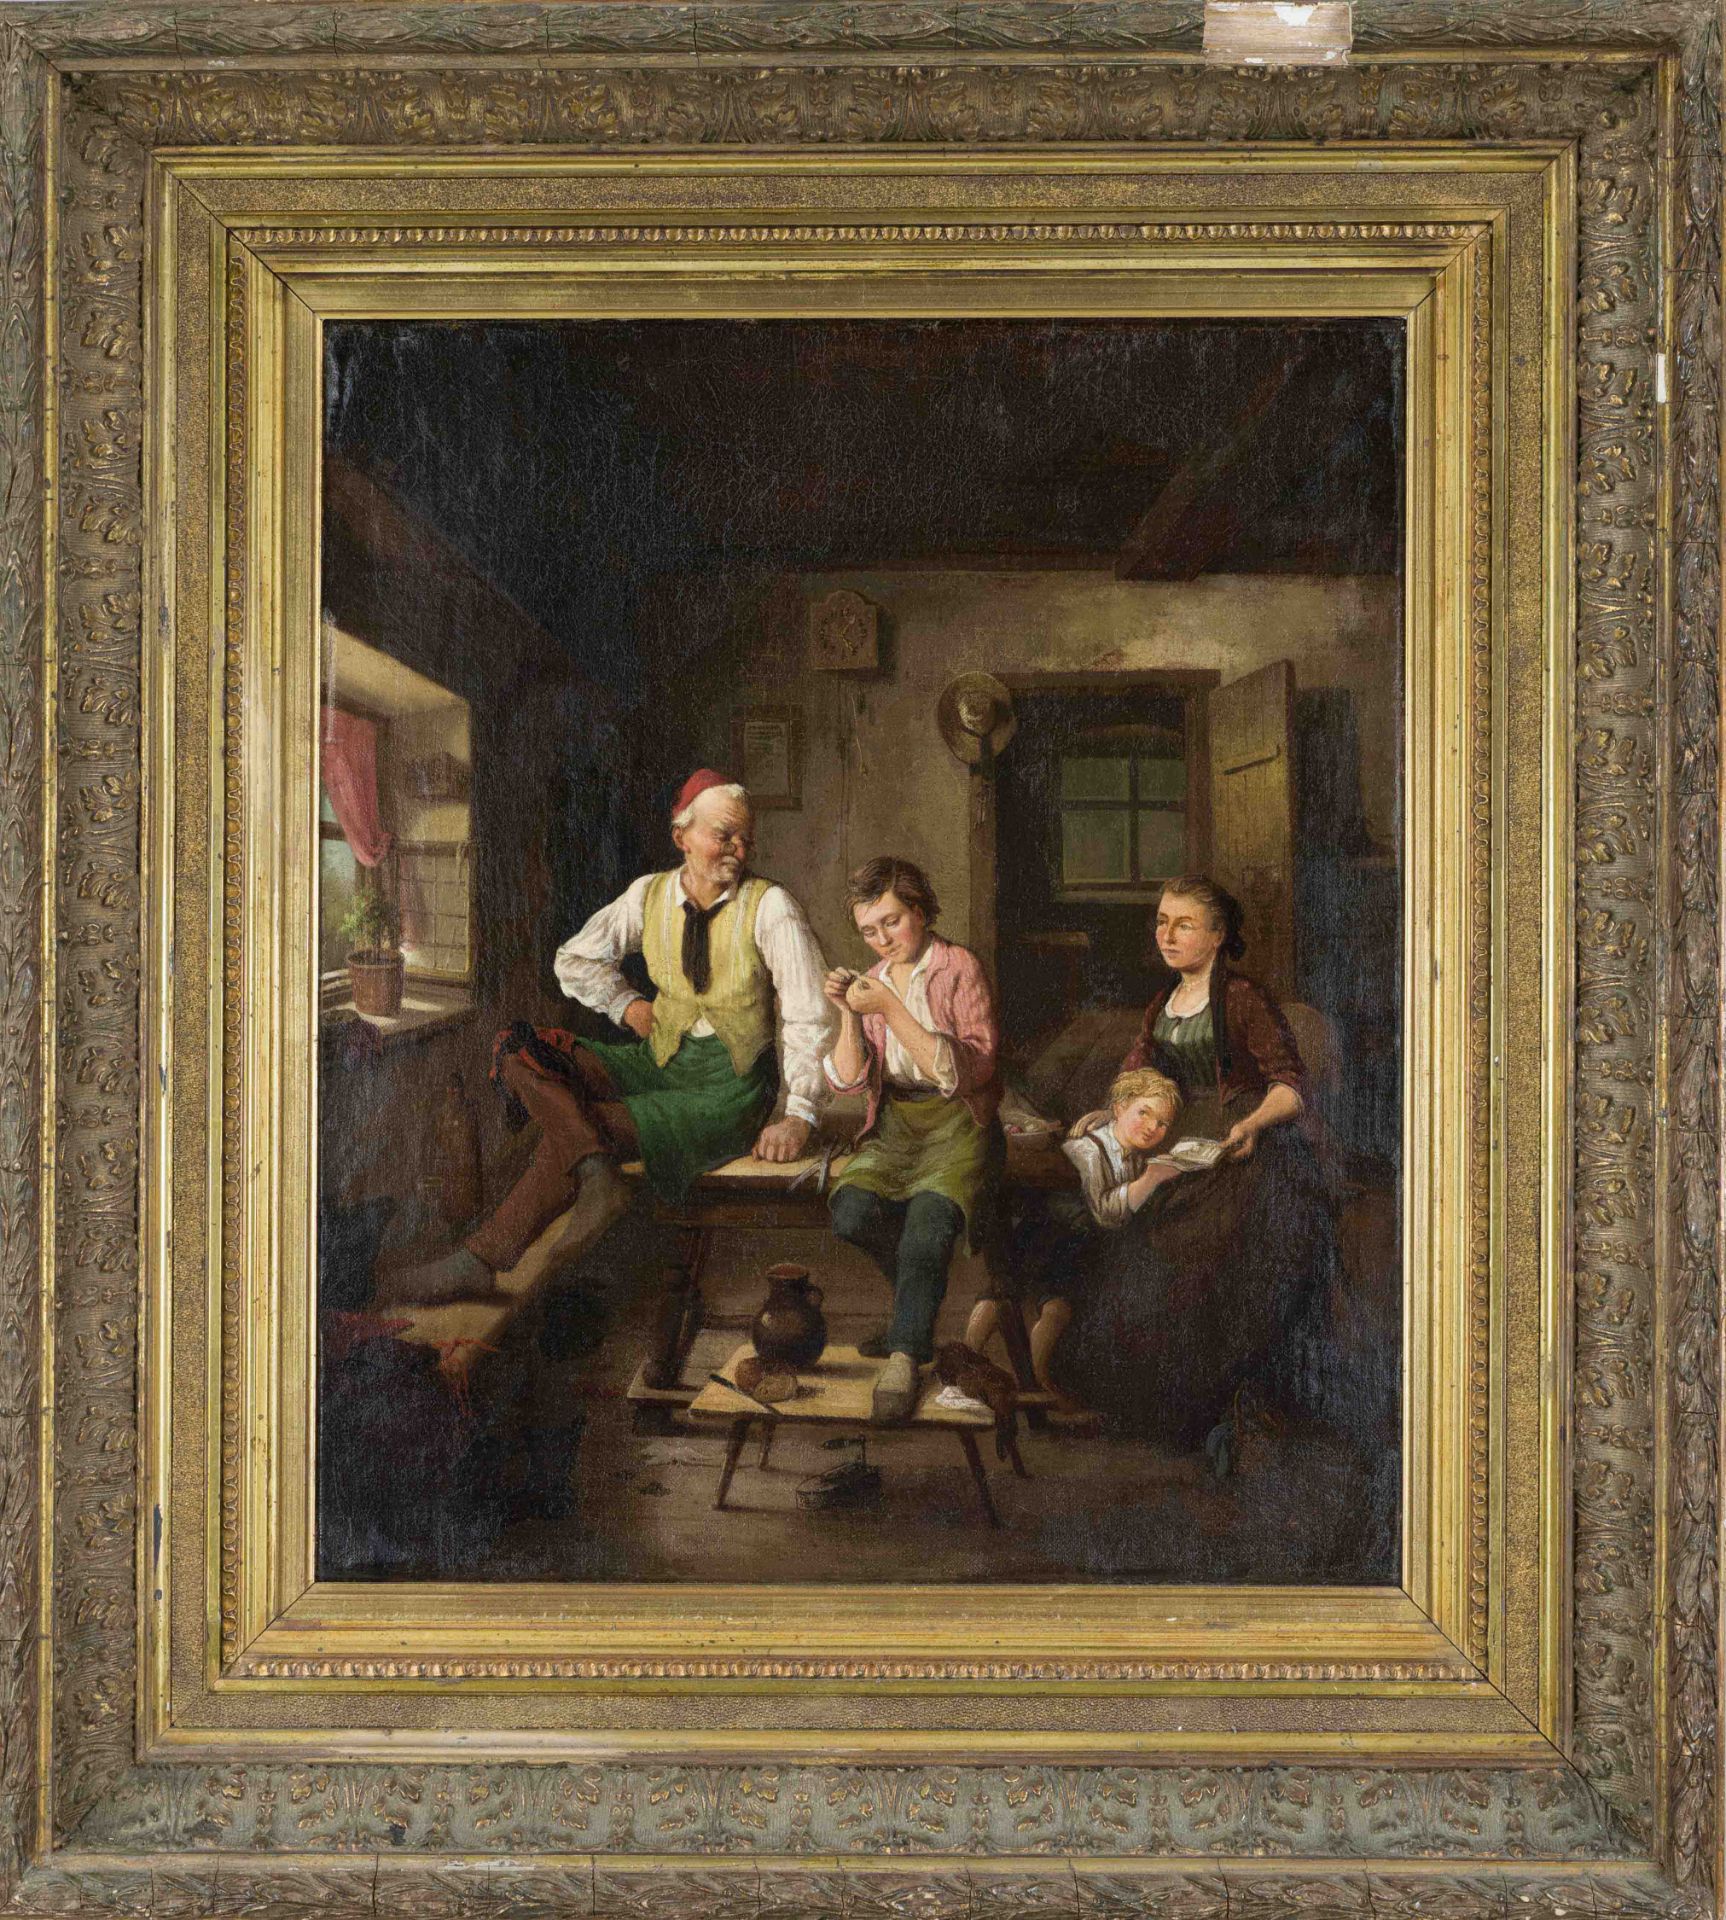 Anonymous painter of the Düsseldorf School 2nd half 19th century, Interior with family doing